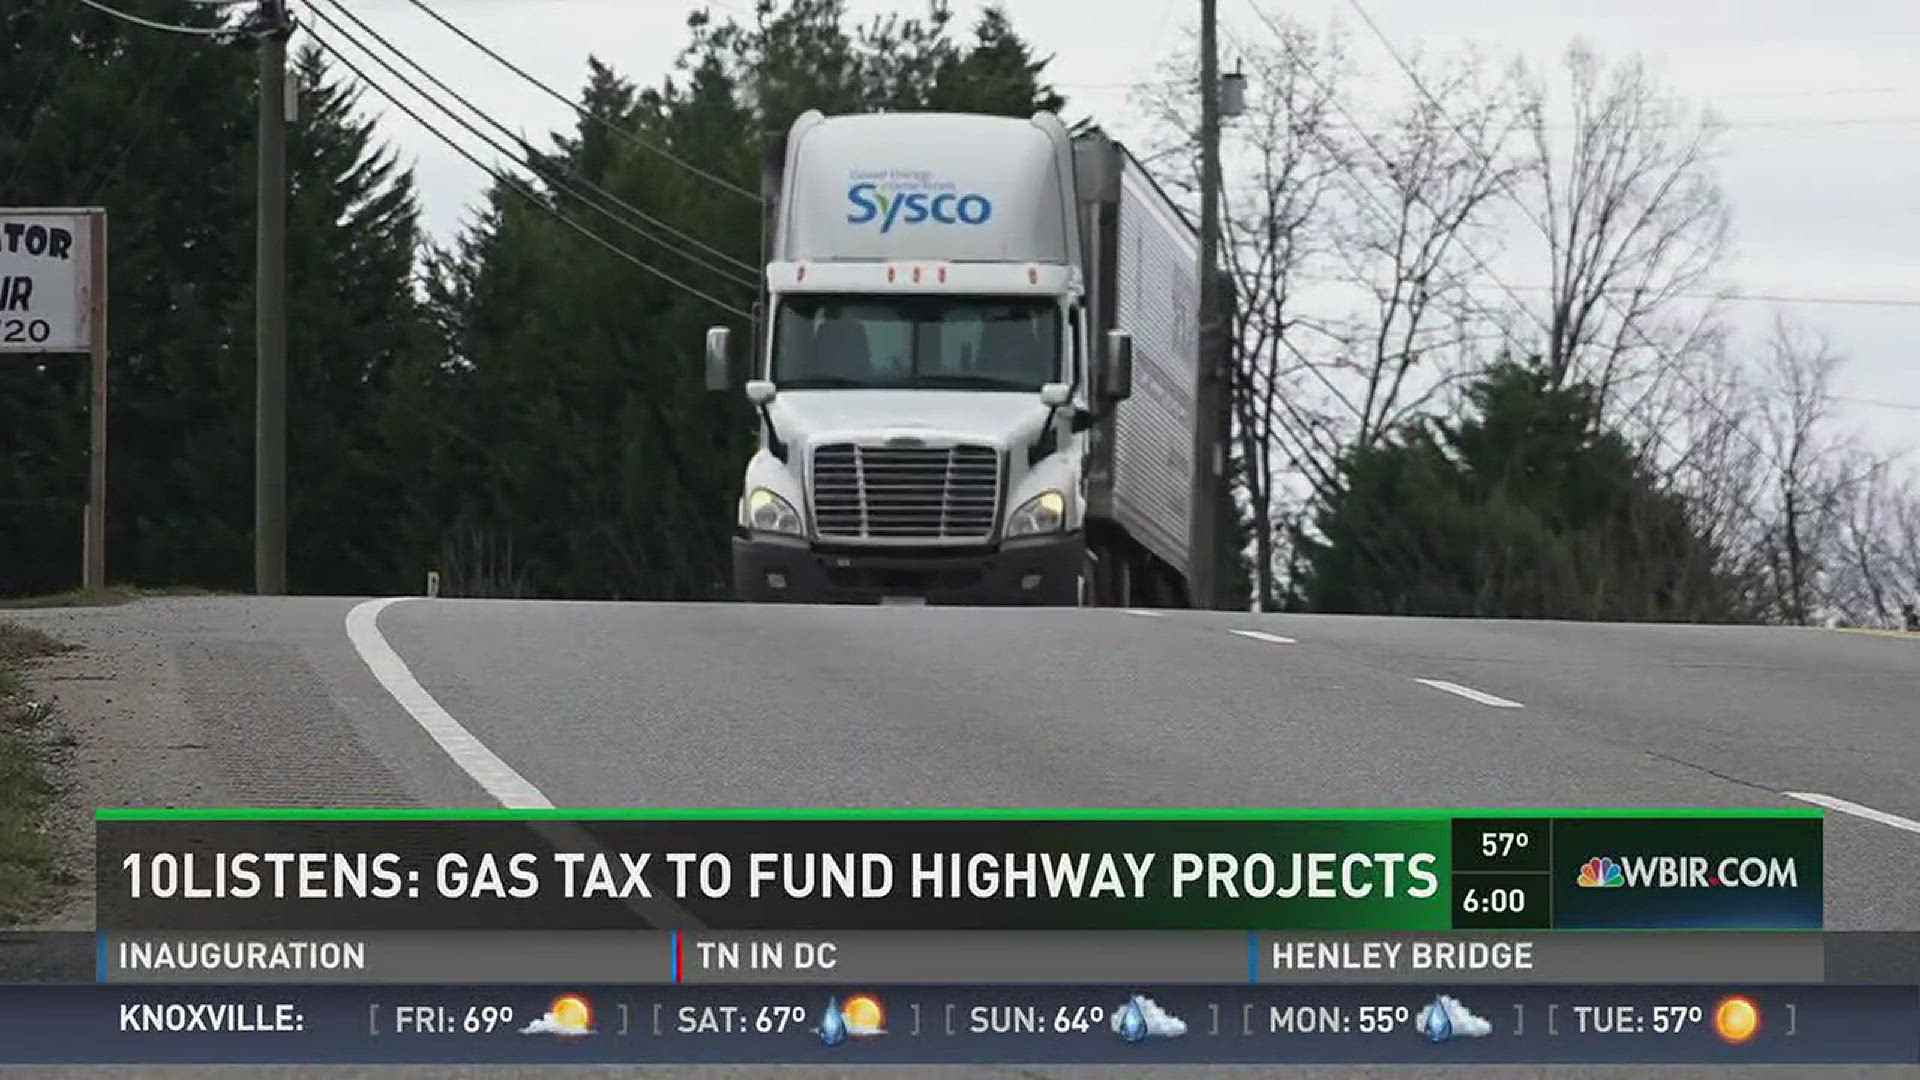 Jan. 19, 2017: Chapman Highway is one of many roads on the target list for TDOT to improve in East Tennessee. Gov. Haslam's proposal to raise the gas tax by seven cents could help create additional funding for this and other projects.